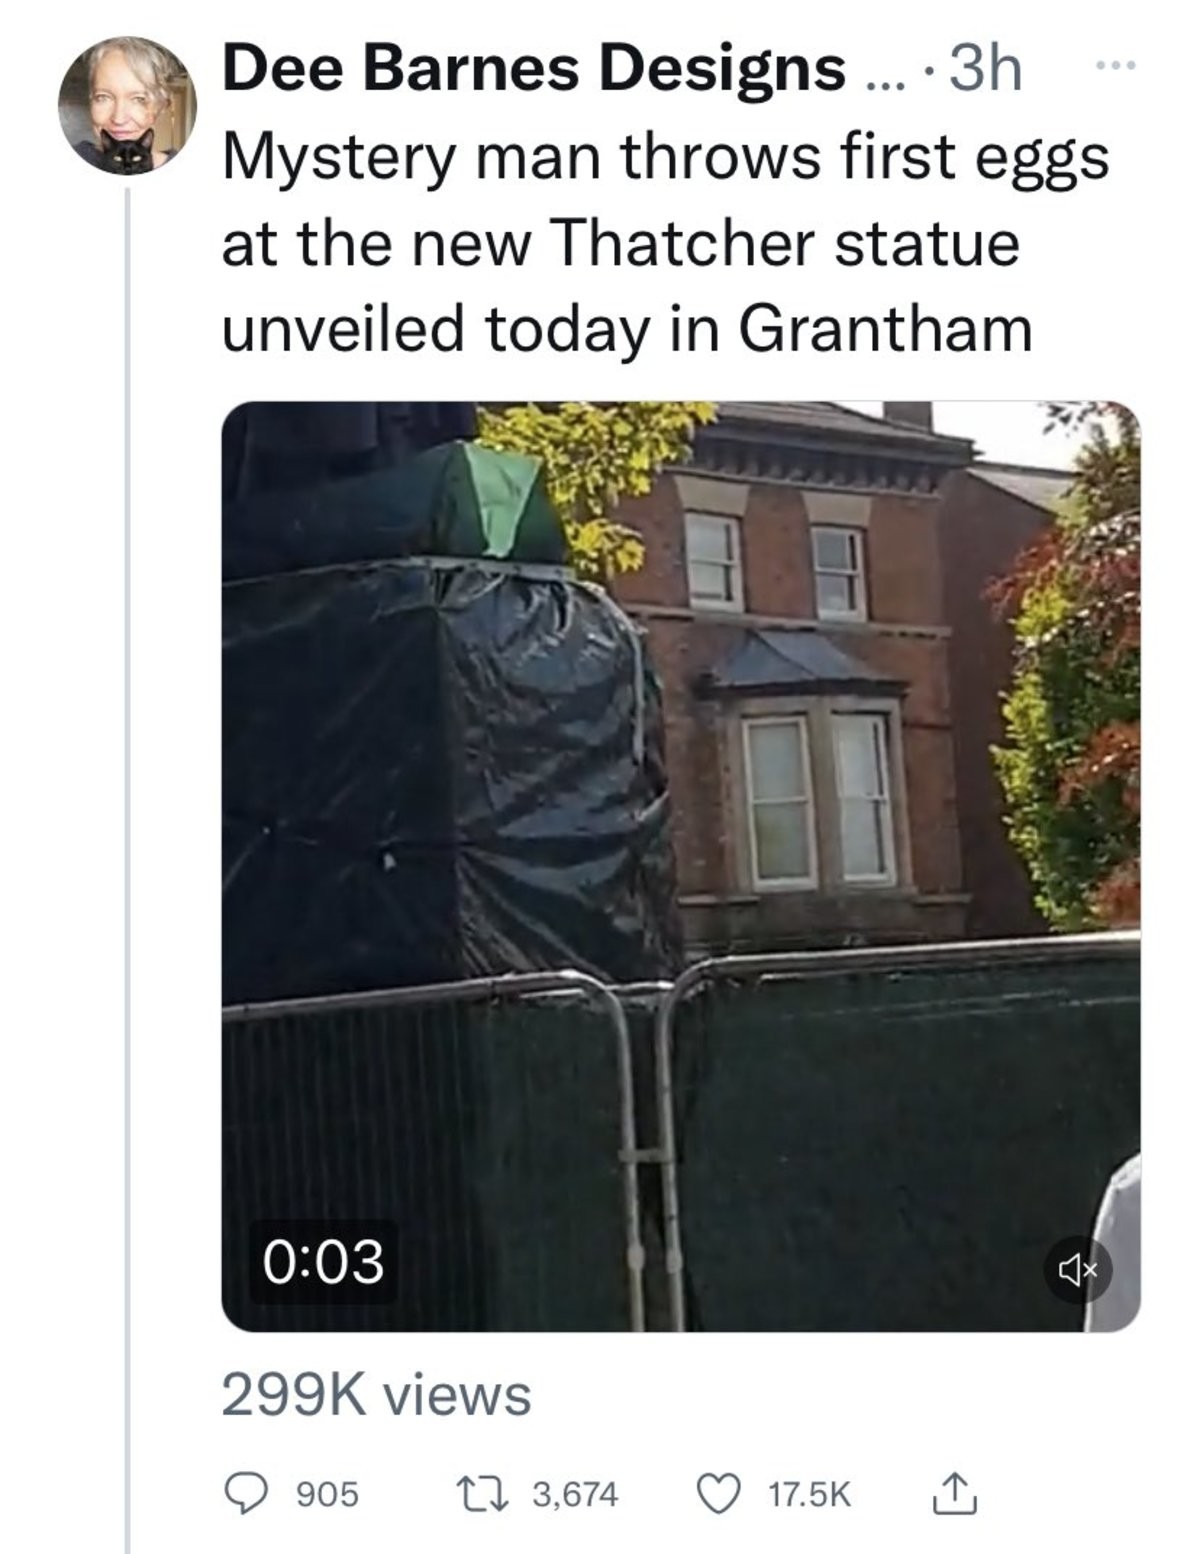 leisure Snail. .. Who is Thatcher? Why does (seemingly) everyone hate her? Why is there a new statue if everyone hates her? Keep your answers short/simple for I am just a burger.